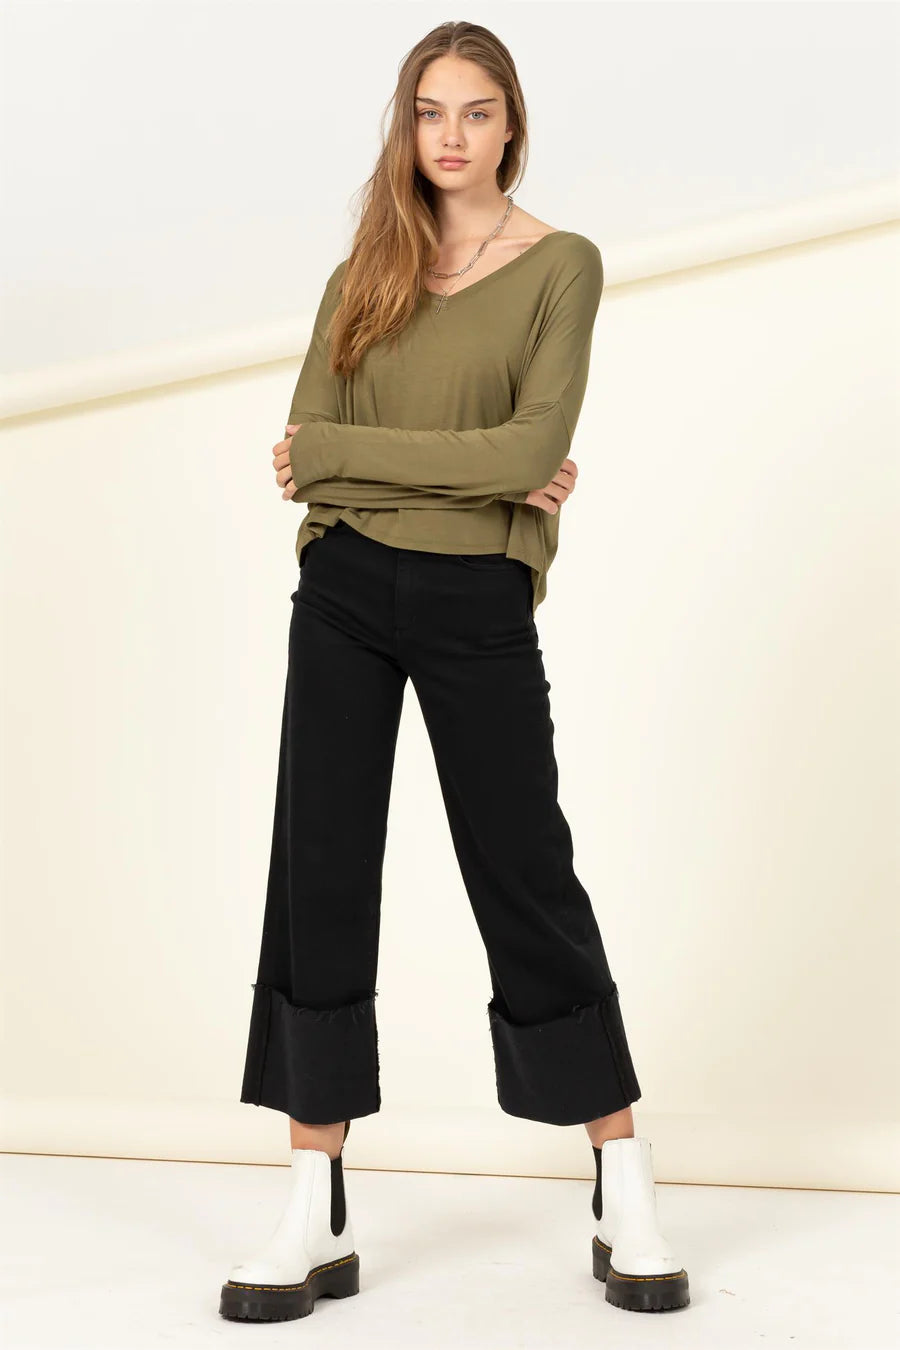 The model is wearing a Olive | Love Me Right V Neck Loose Fit Top by HYFVE and black pants.